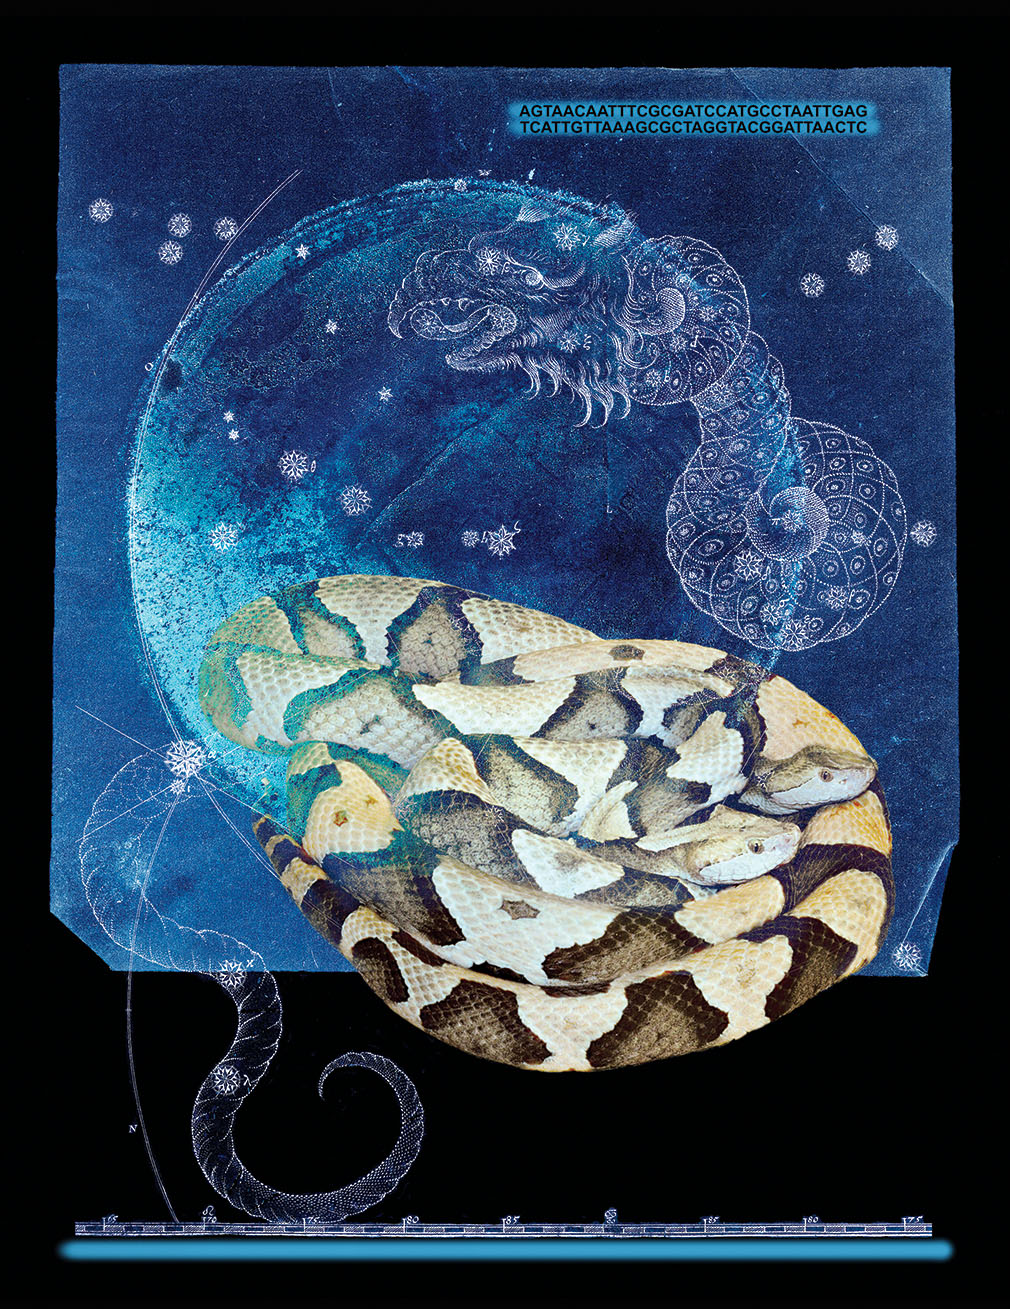 Two Copperheads, by Olivia Hood Parker ’63, a photograph featuring a color image of two entwined copperhead snakes, placed on an etched illustration of a Chinese dragon, with a series of letters representing DNA code